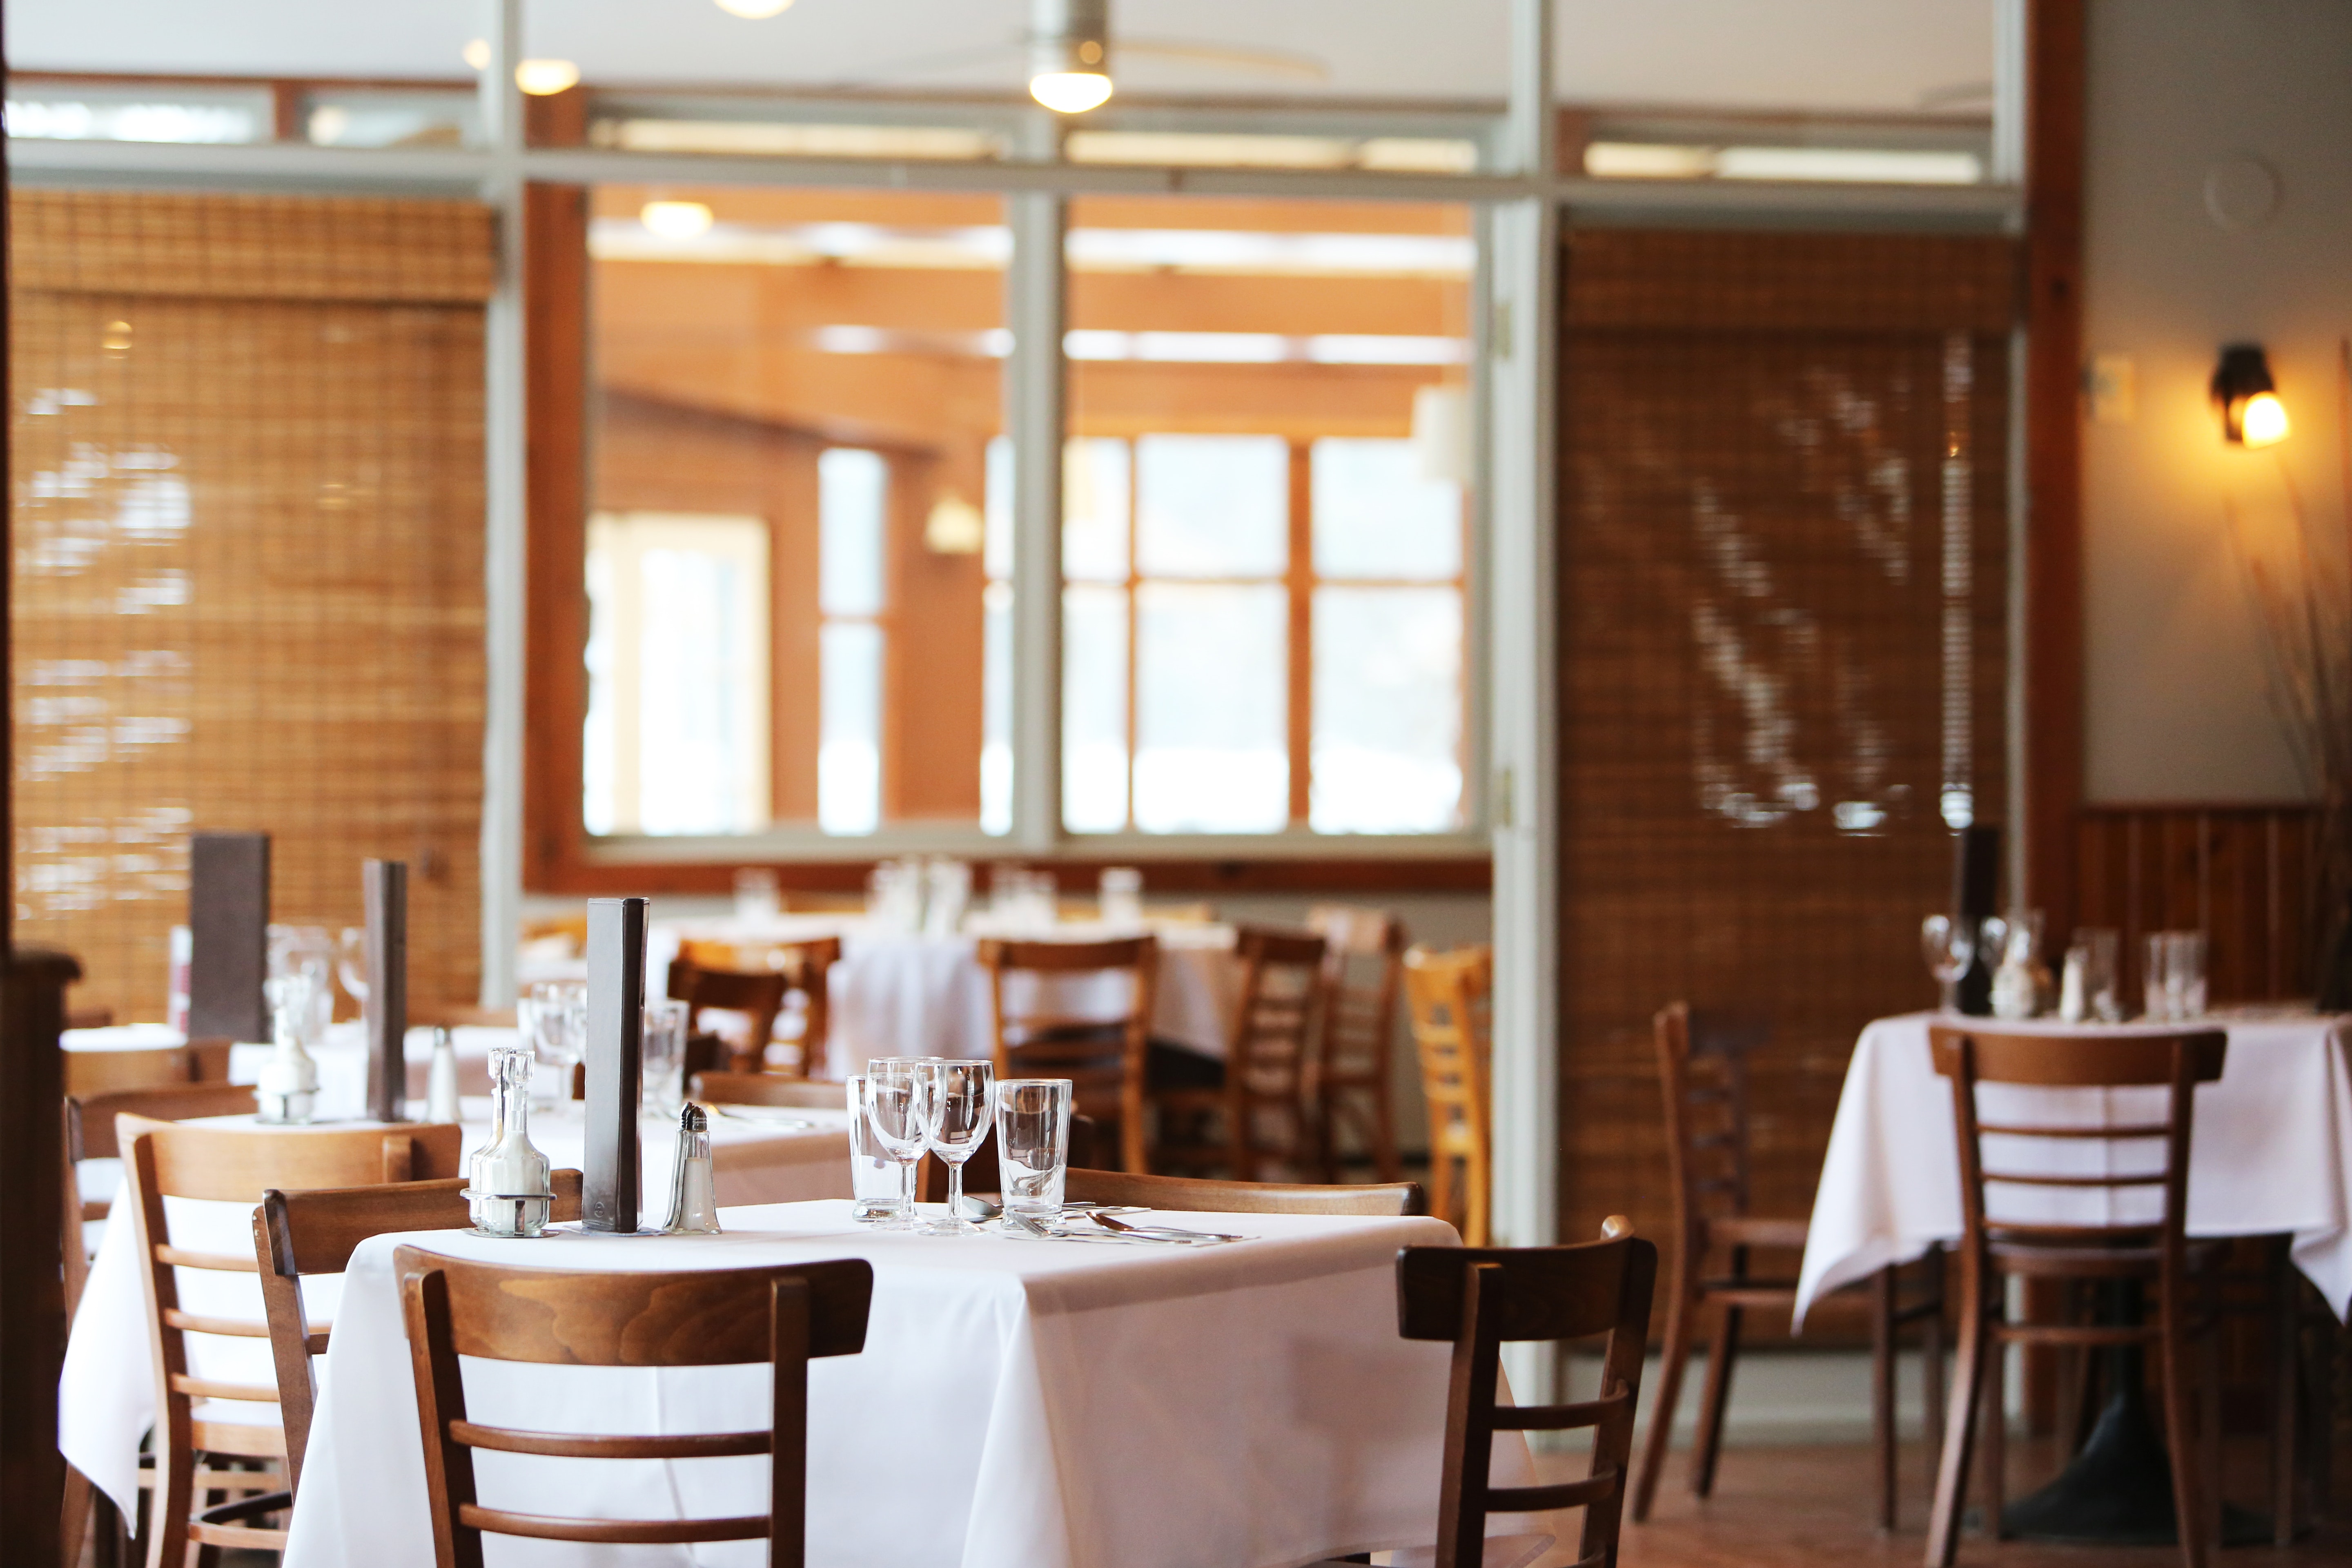 Restaurant Janitorial Services | Integrity Service Companies